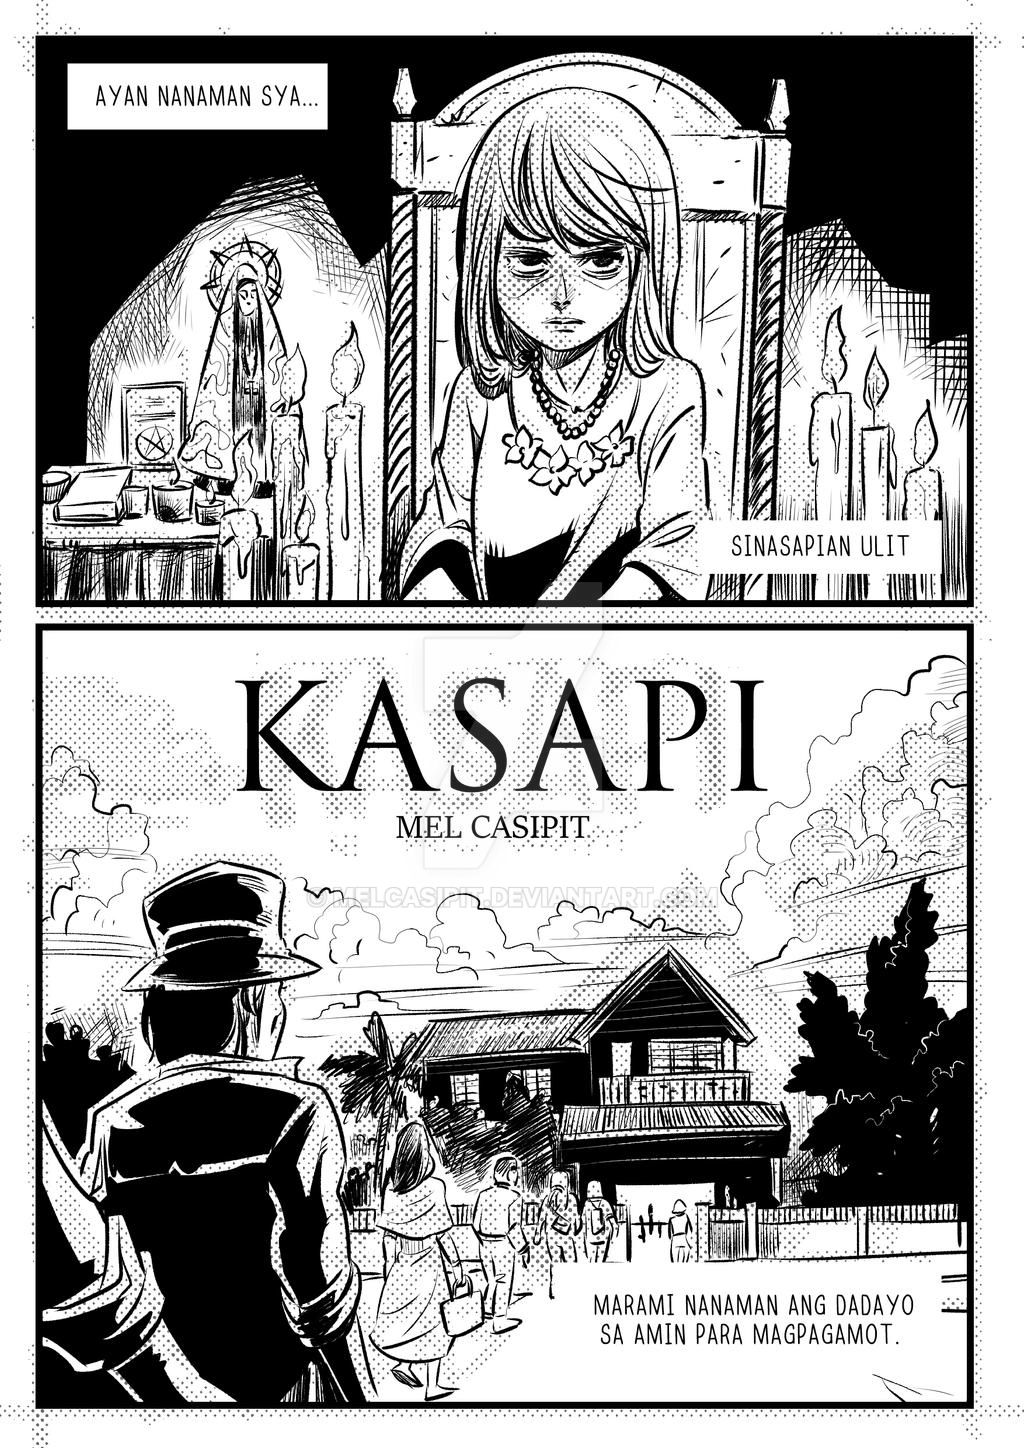 kasapi_page_1_by_melcasipit_dczalq5-fullview